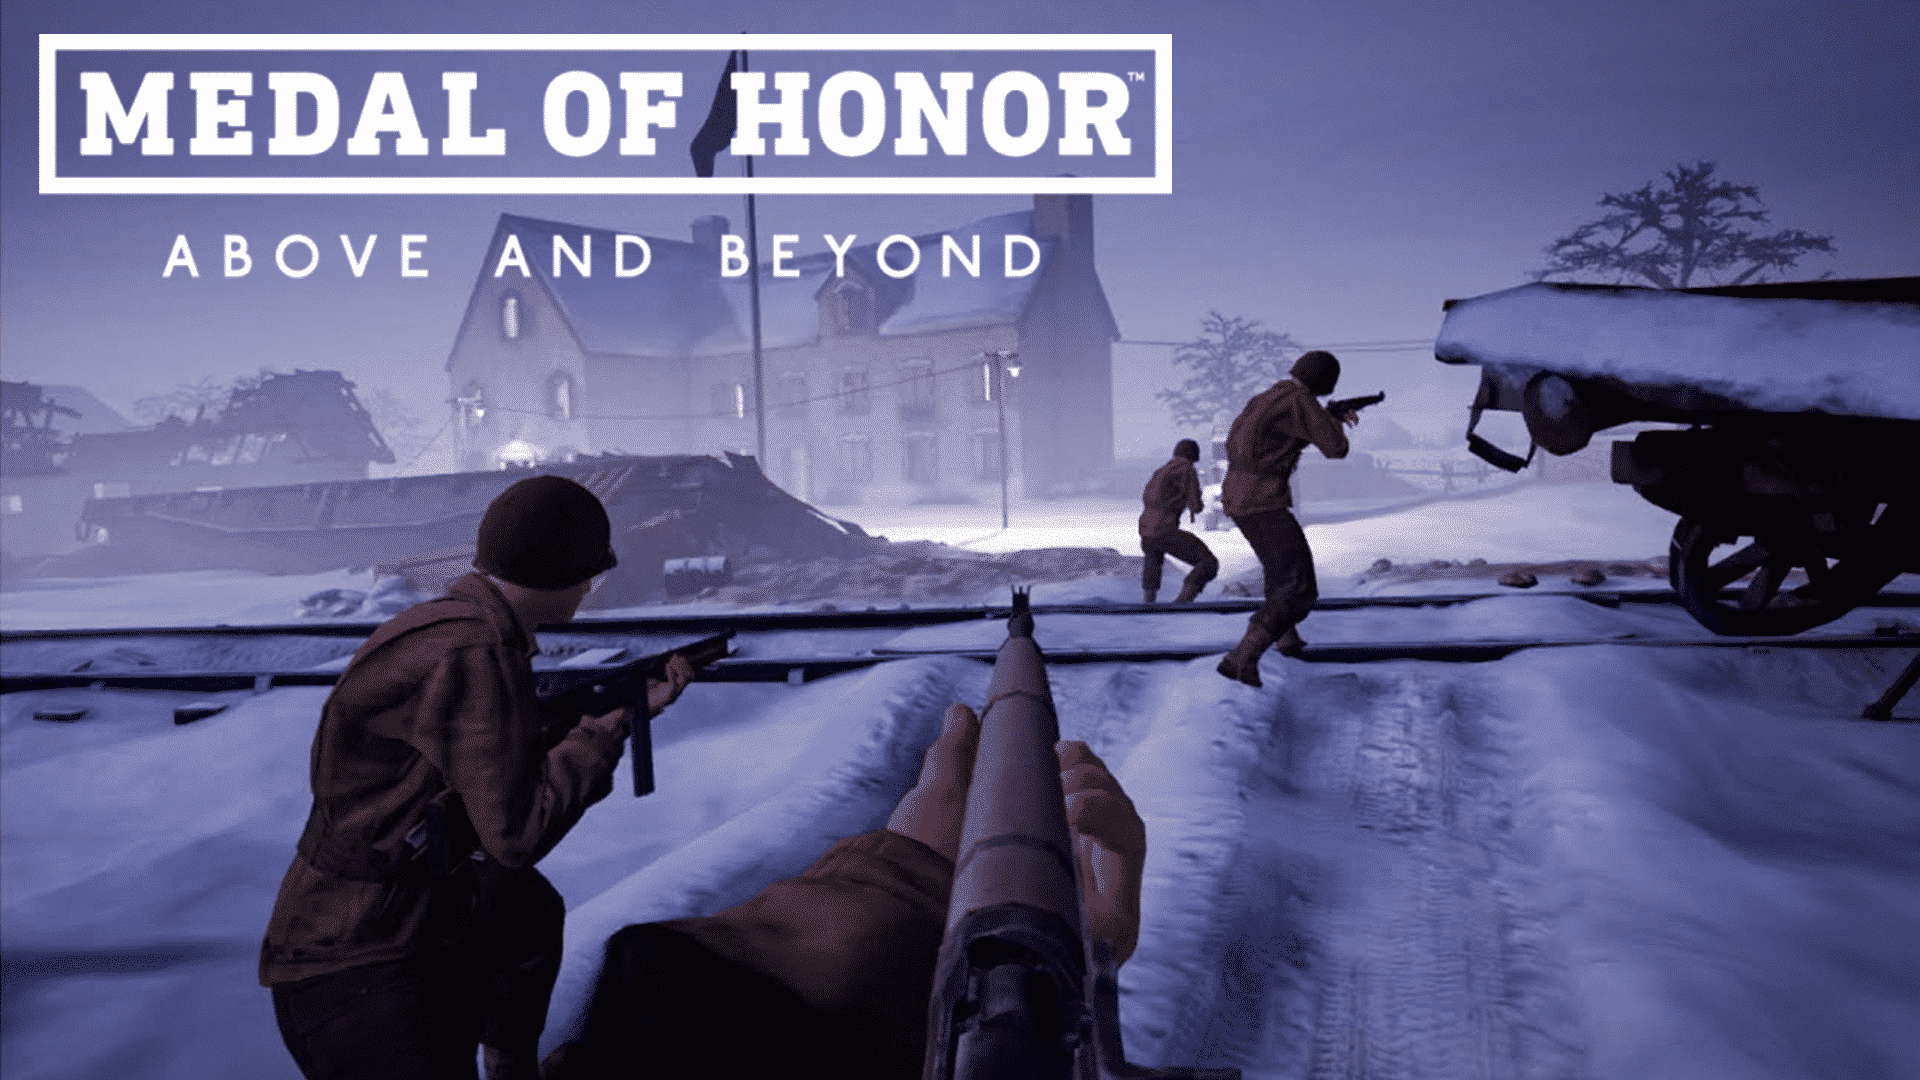 VirtuosがOculus Quest 2版の「Medal of Honor: Above and Beyond」の 制作に参加させていただきました